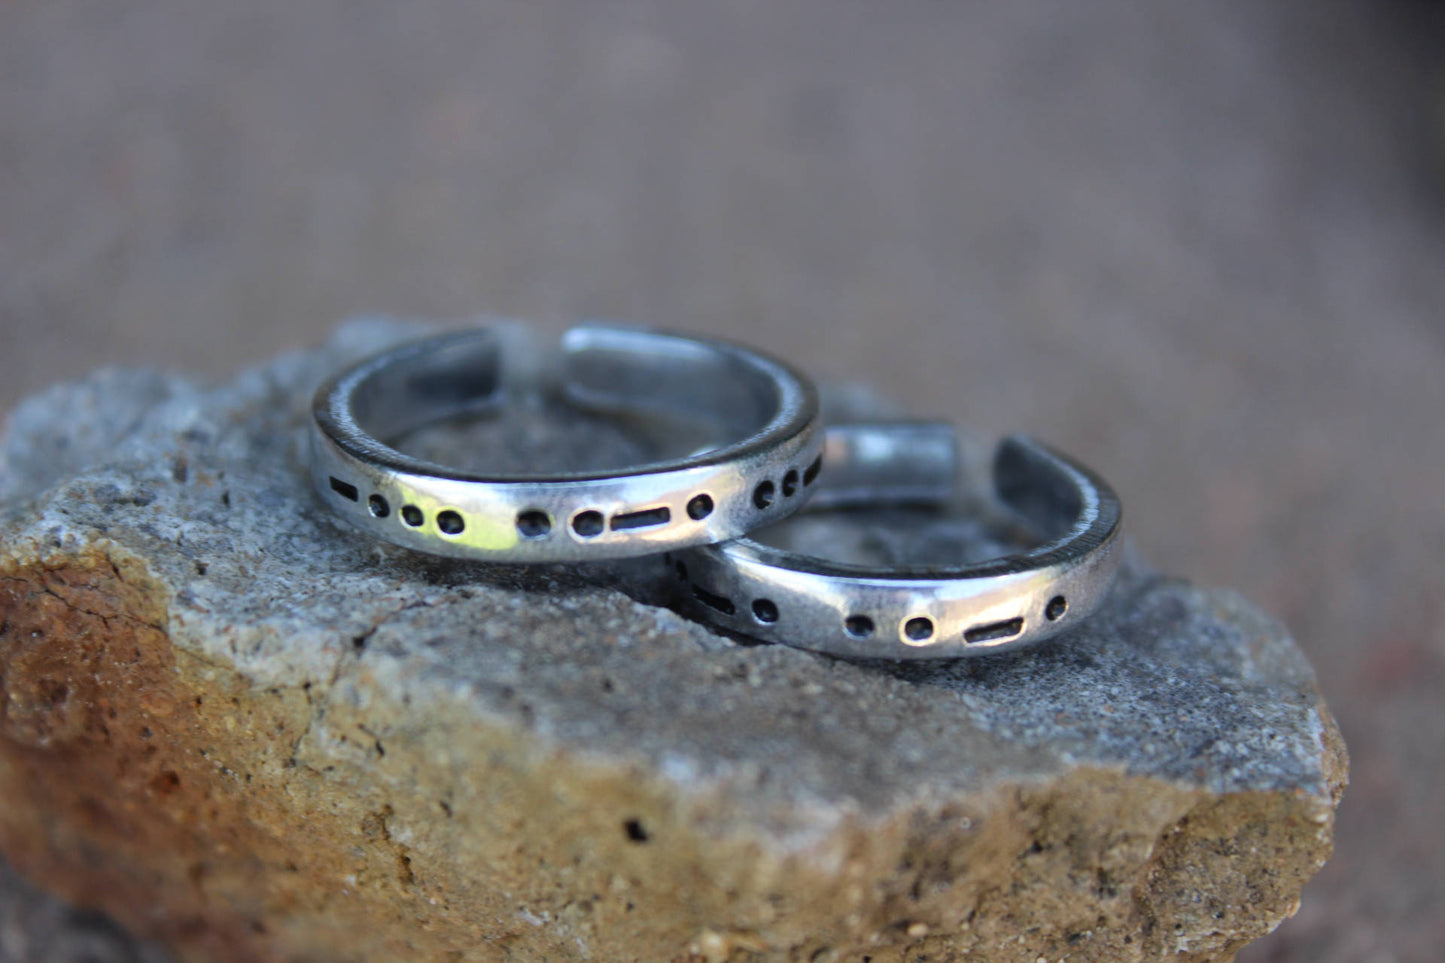 Best Friends Forever (BFF) Morse Code Ring